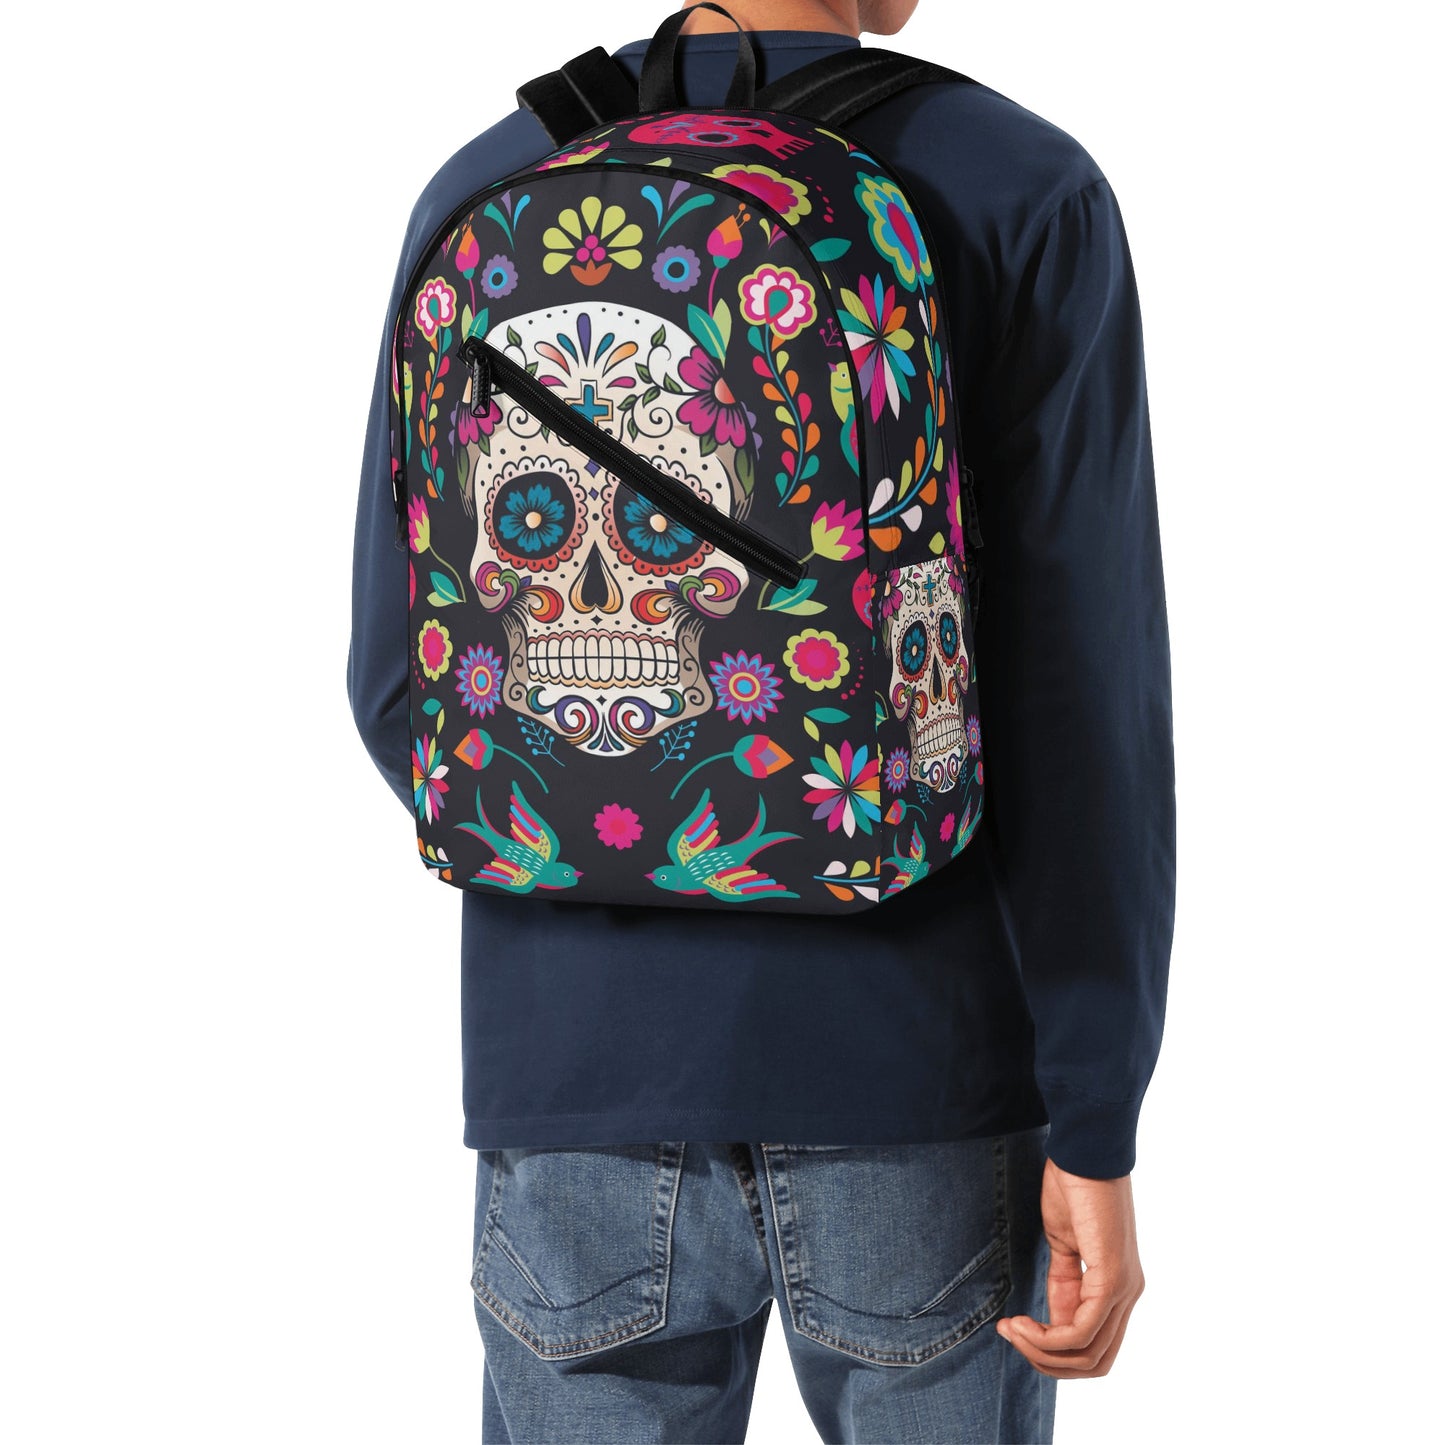 Sugar skull Day of the dead Halloweeen gothic New Half Printing Laptop Backpack